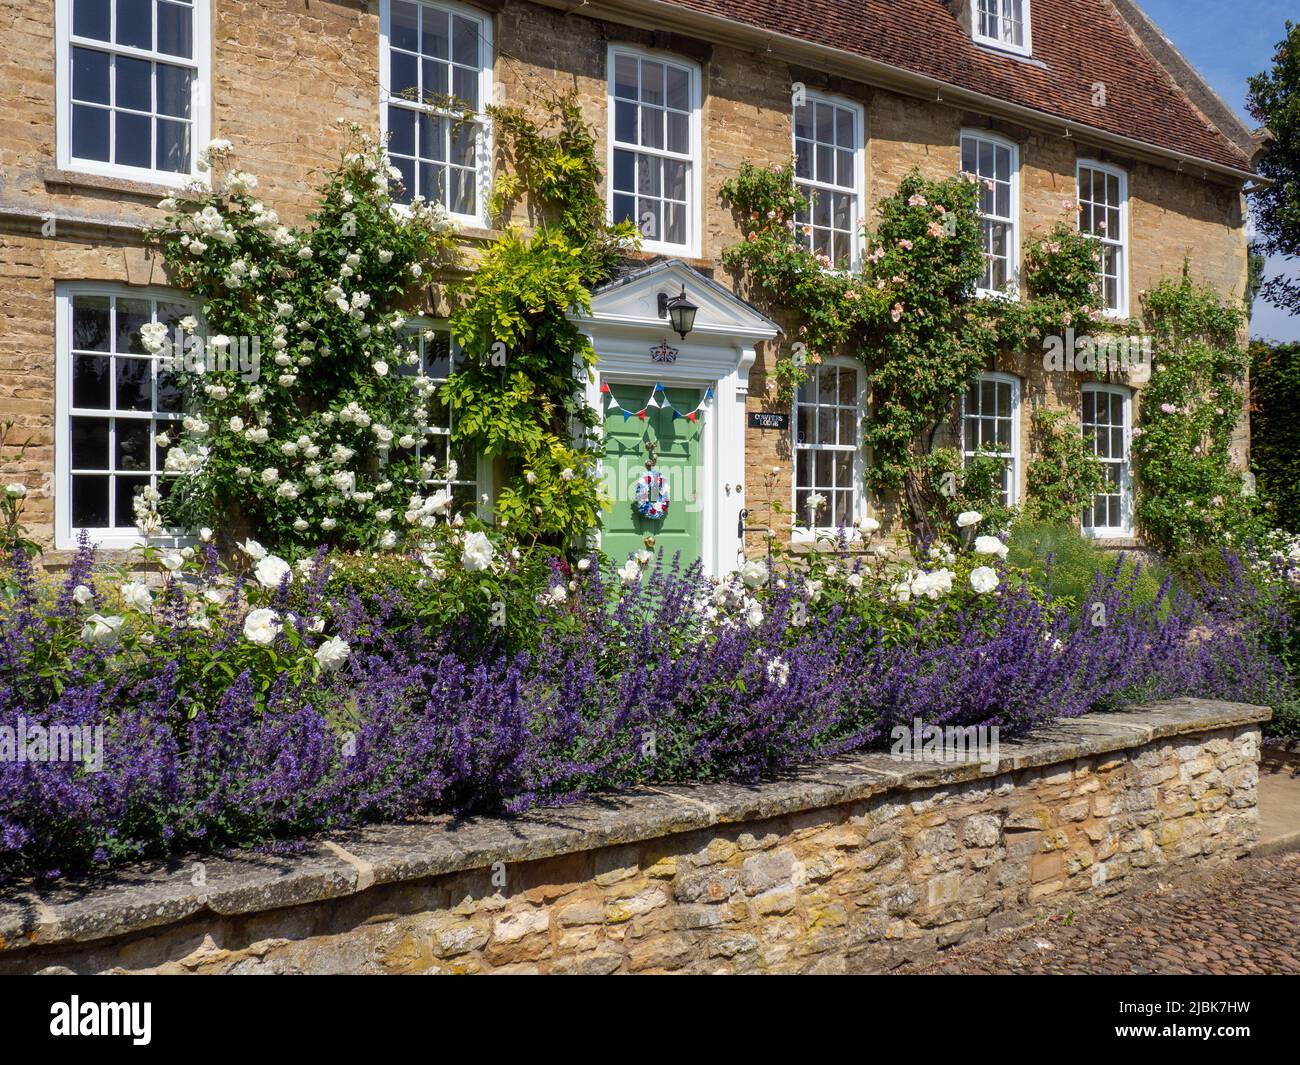 Detached stone built period property with colourful planting and climbers, Weston Underwood, Buckinghamshire, England, UK Stock Photo